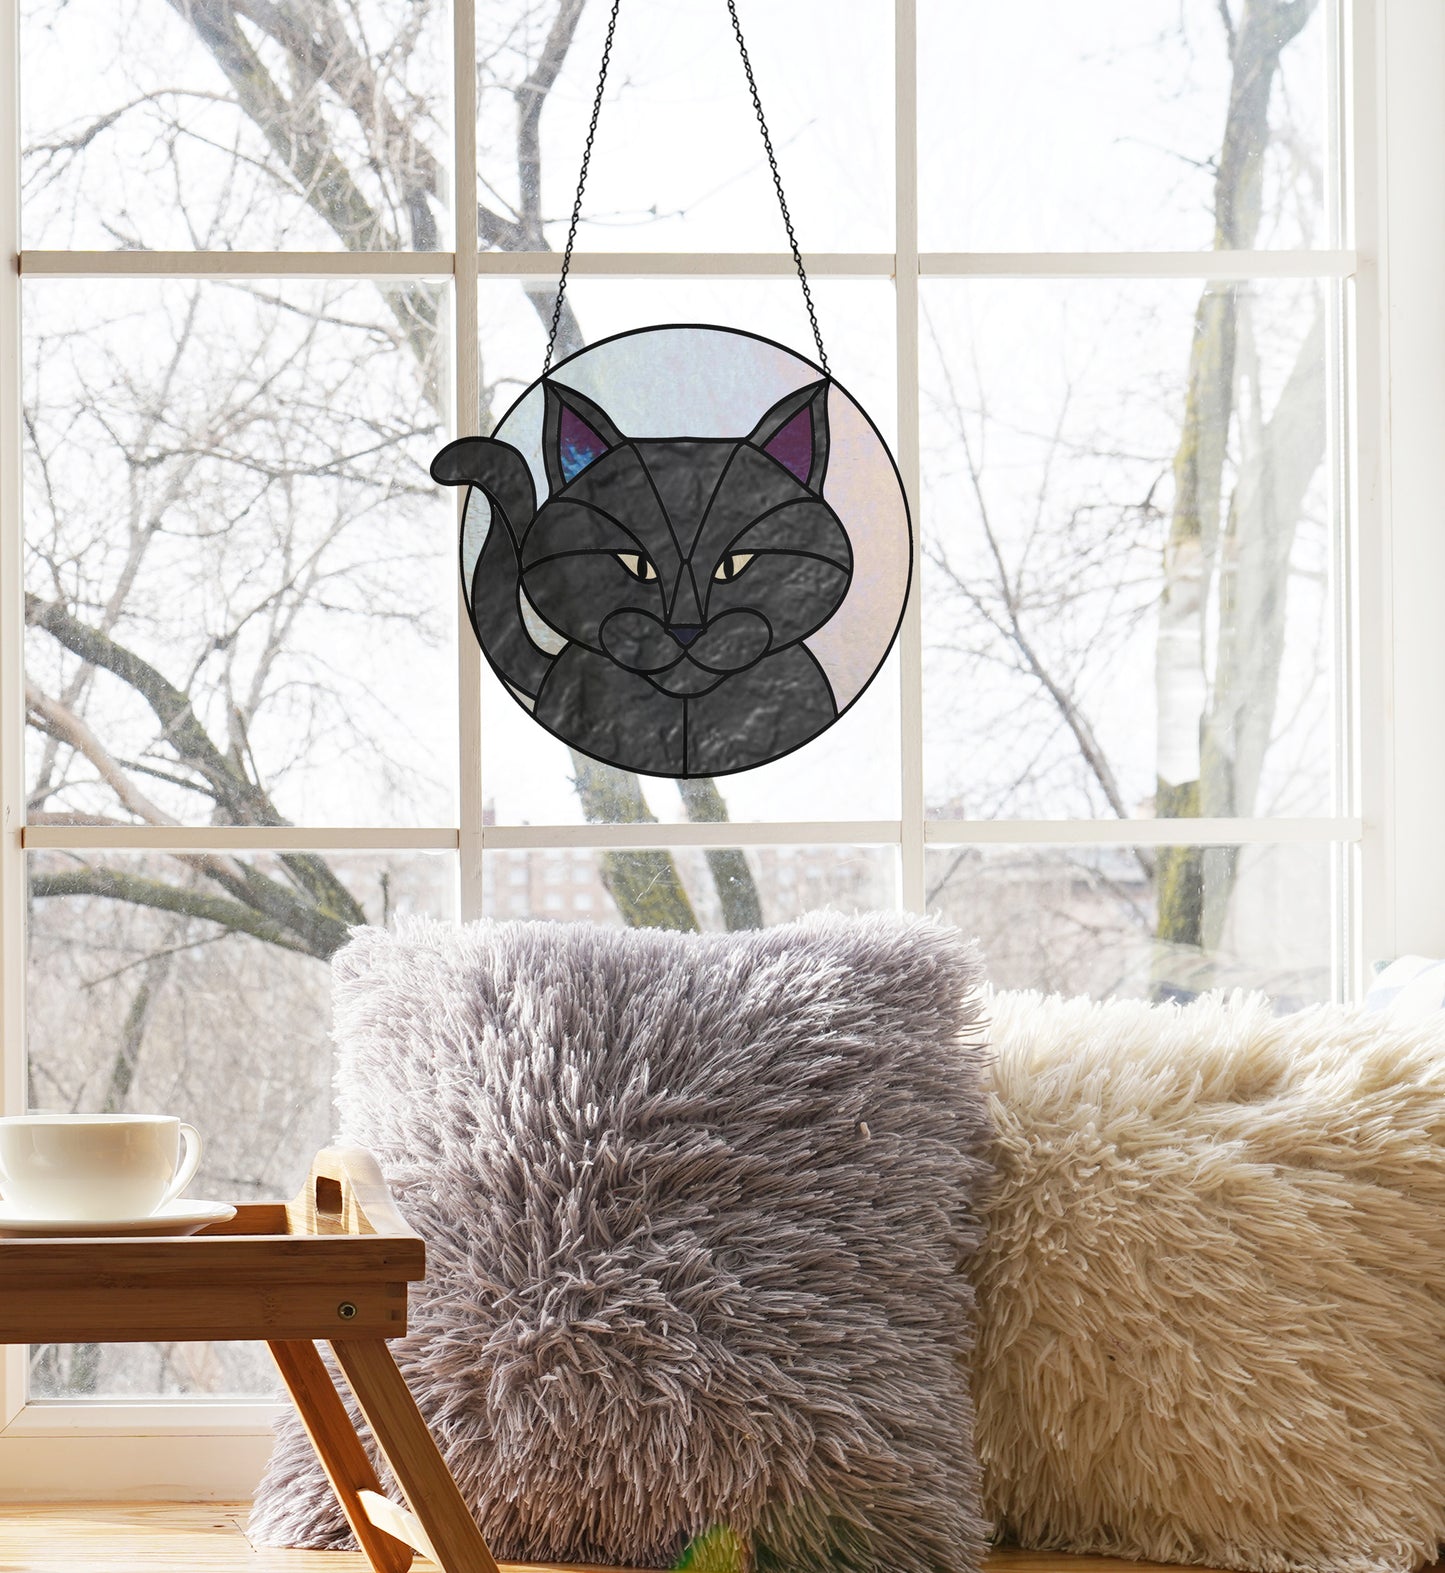 Full Moon Halloween Black Cat Stained Glass Pattern